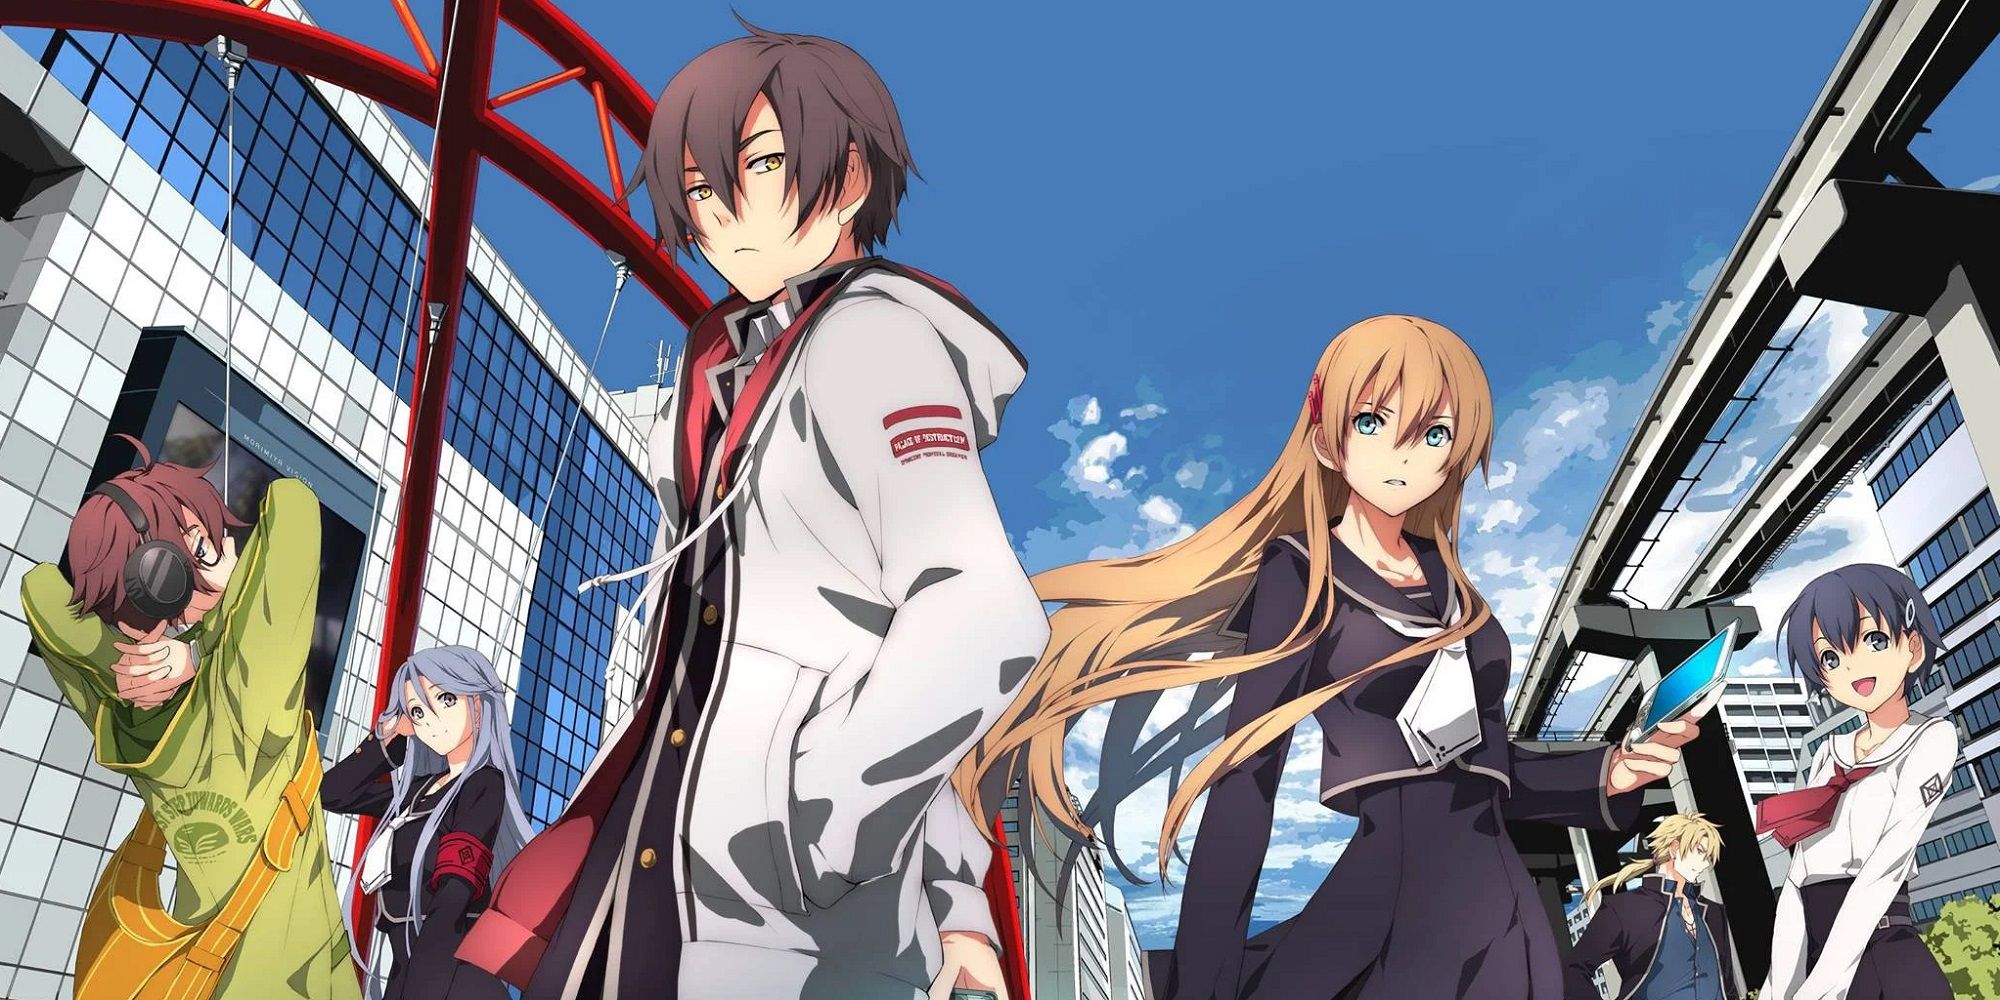 Tokyo Xanadu ex+. Sora Tokyo Xanadu. Xanadu Tokyo ex+ Limited Edition. Tokyo play